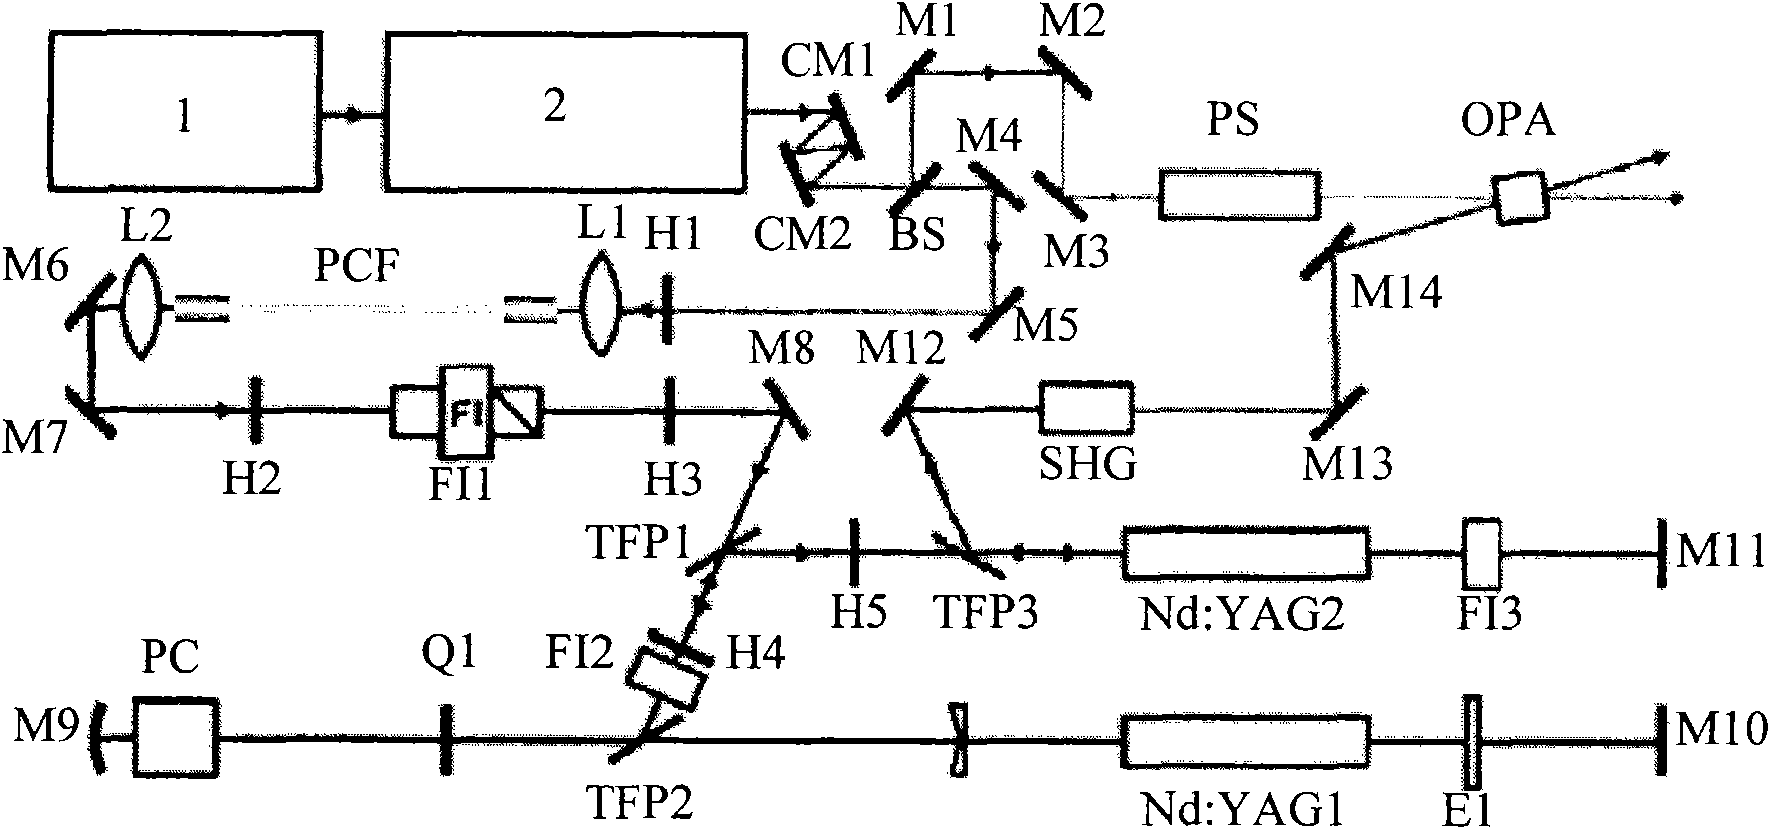 Remote all-optical synchronous optical parameter chirped pulse amplification laser system